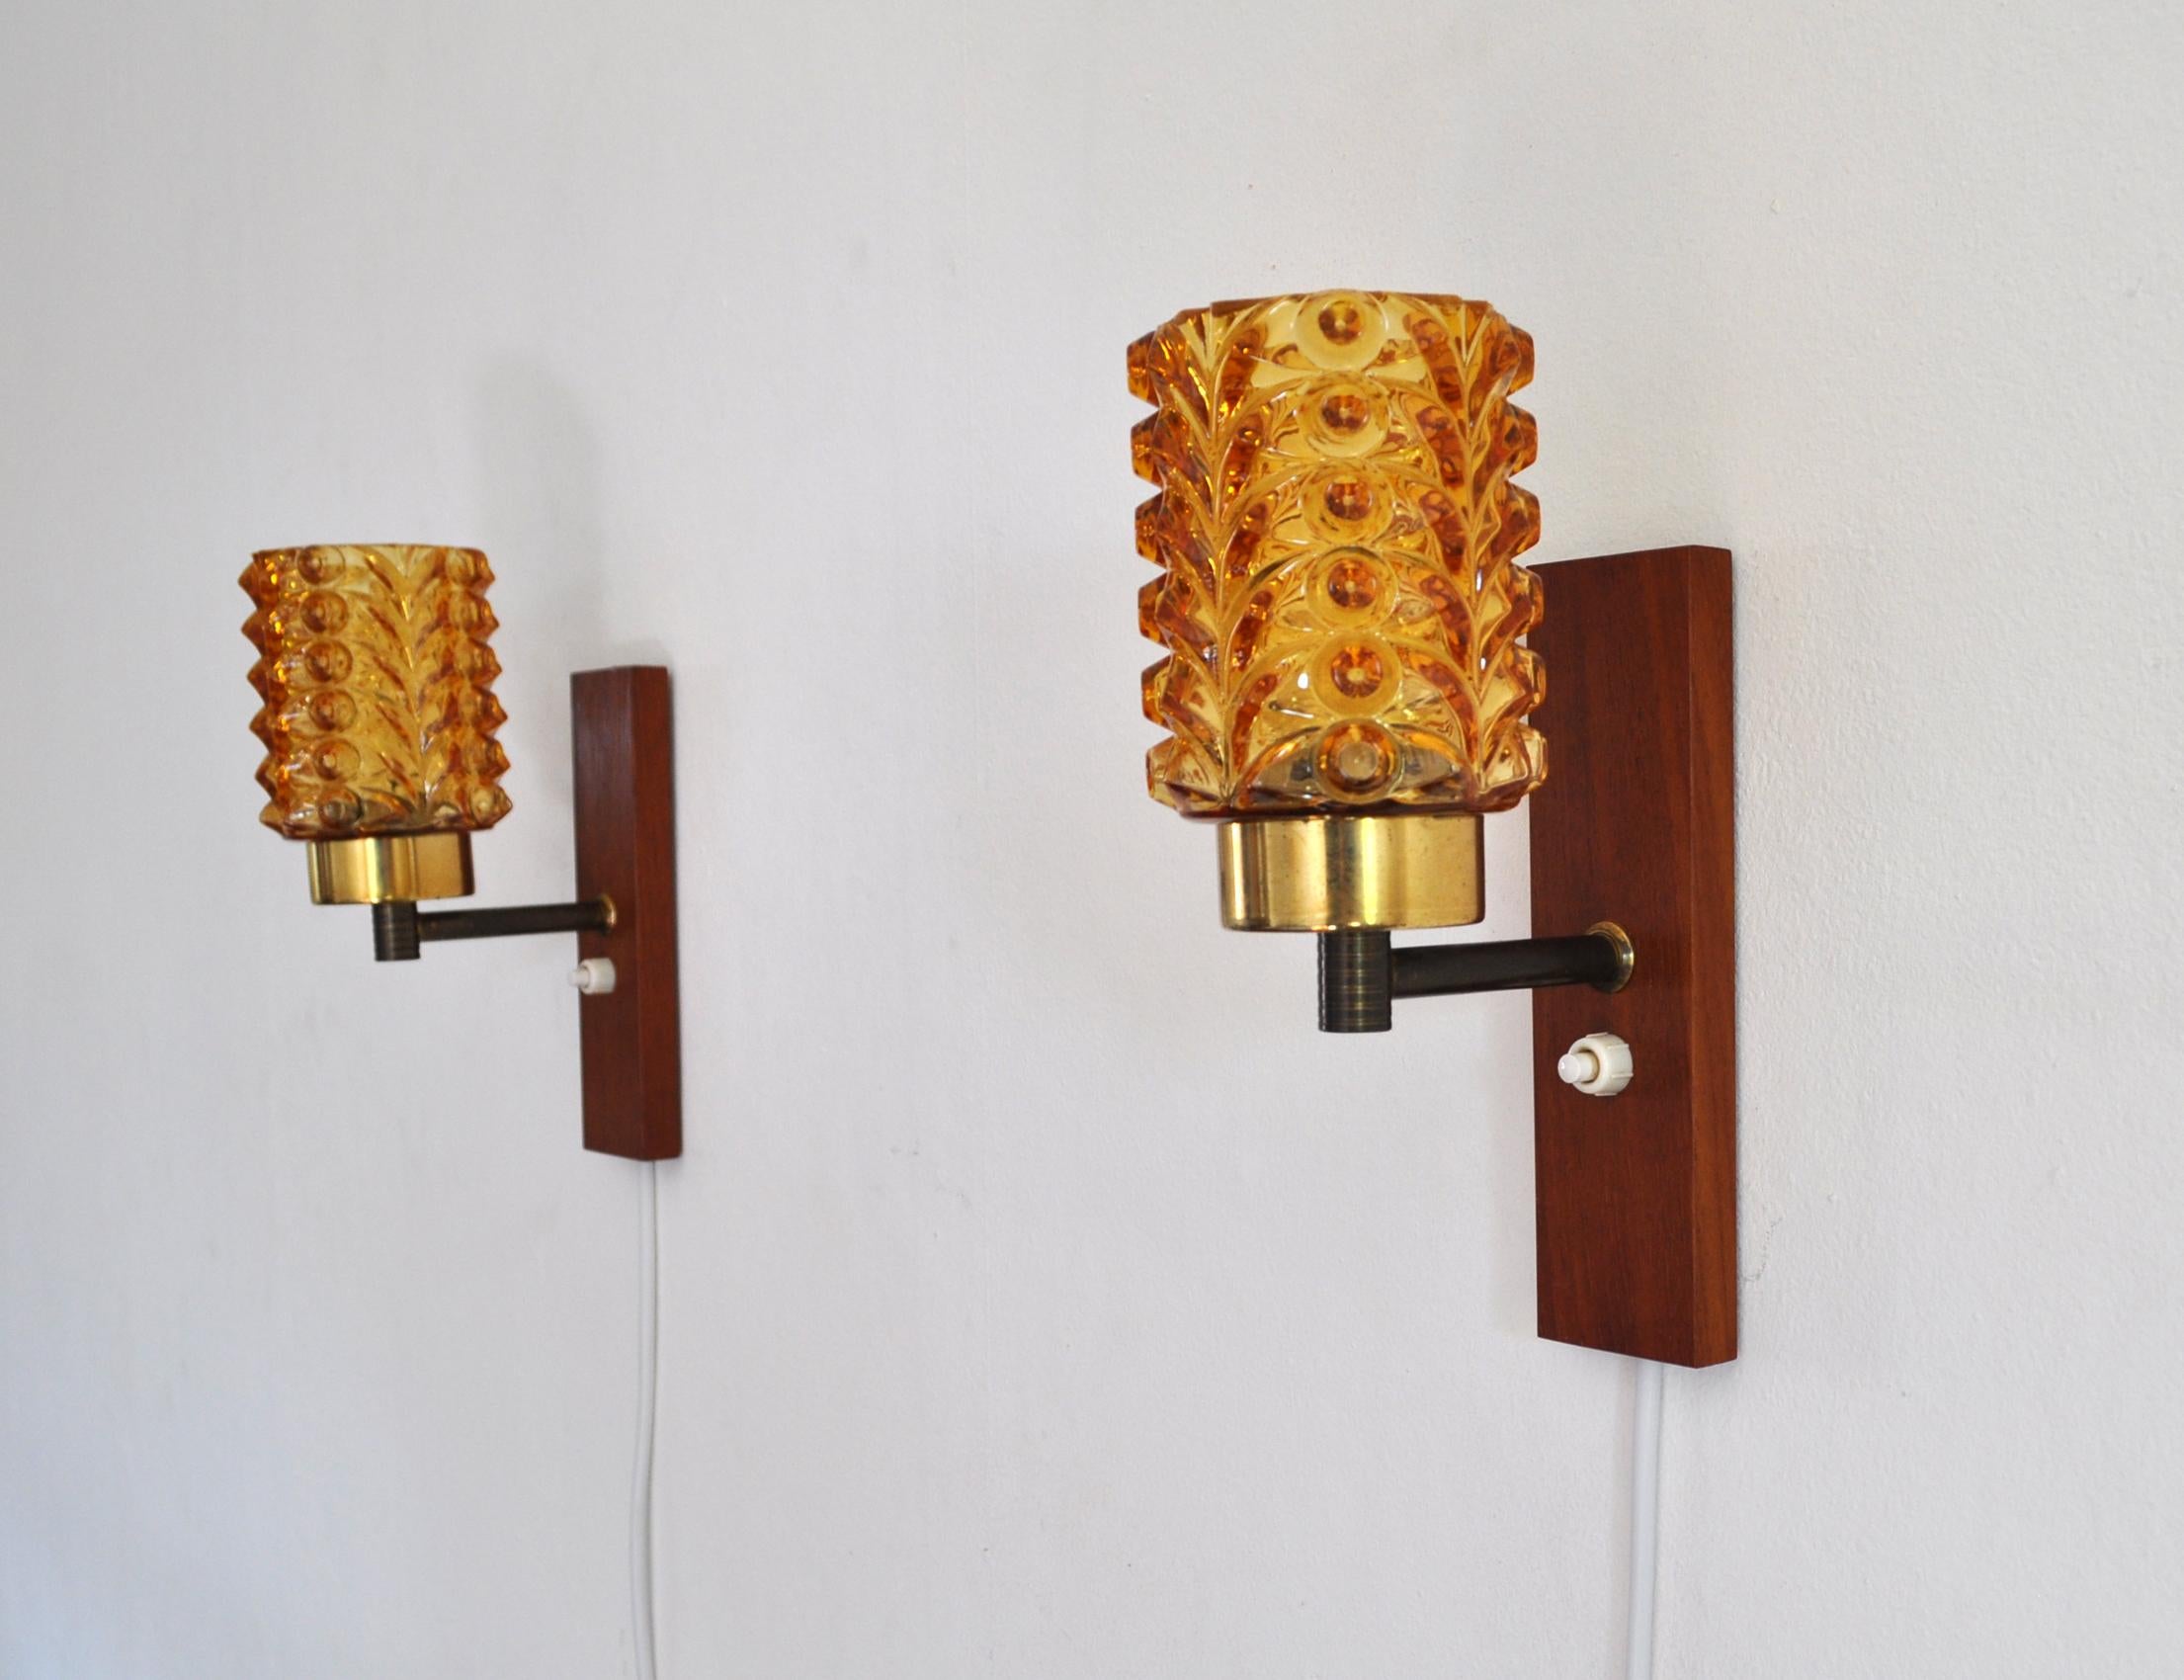 Mid-Century Modern pair of wall lights in solid teak, brass and amber colored glass shade, Denmark the 1950s.
Very good vintage condition.

Dimensions:
Height: 20 cm
Width: 7.5 cm
Depth: 12.5 cm
Glass shade: diameter 7.5 cm, height (visible